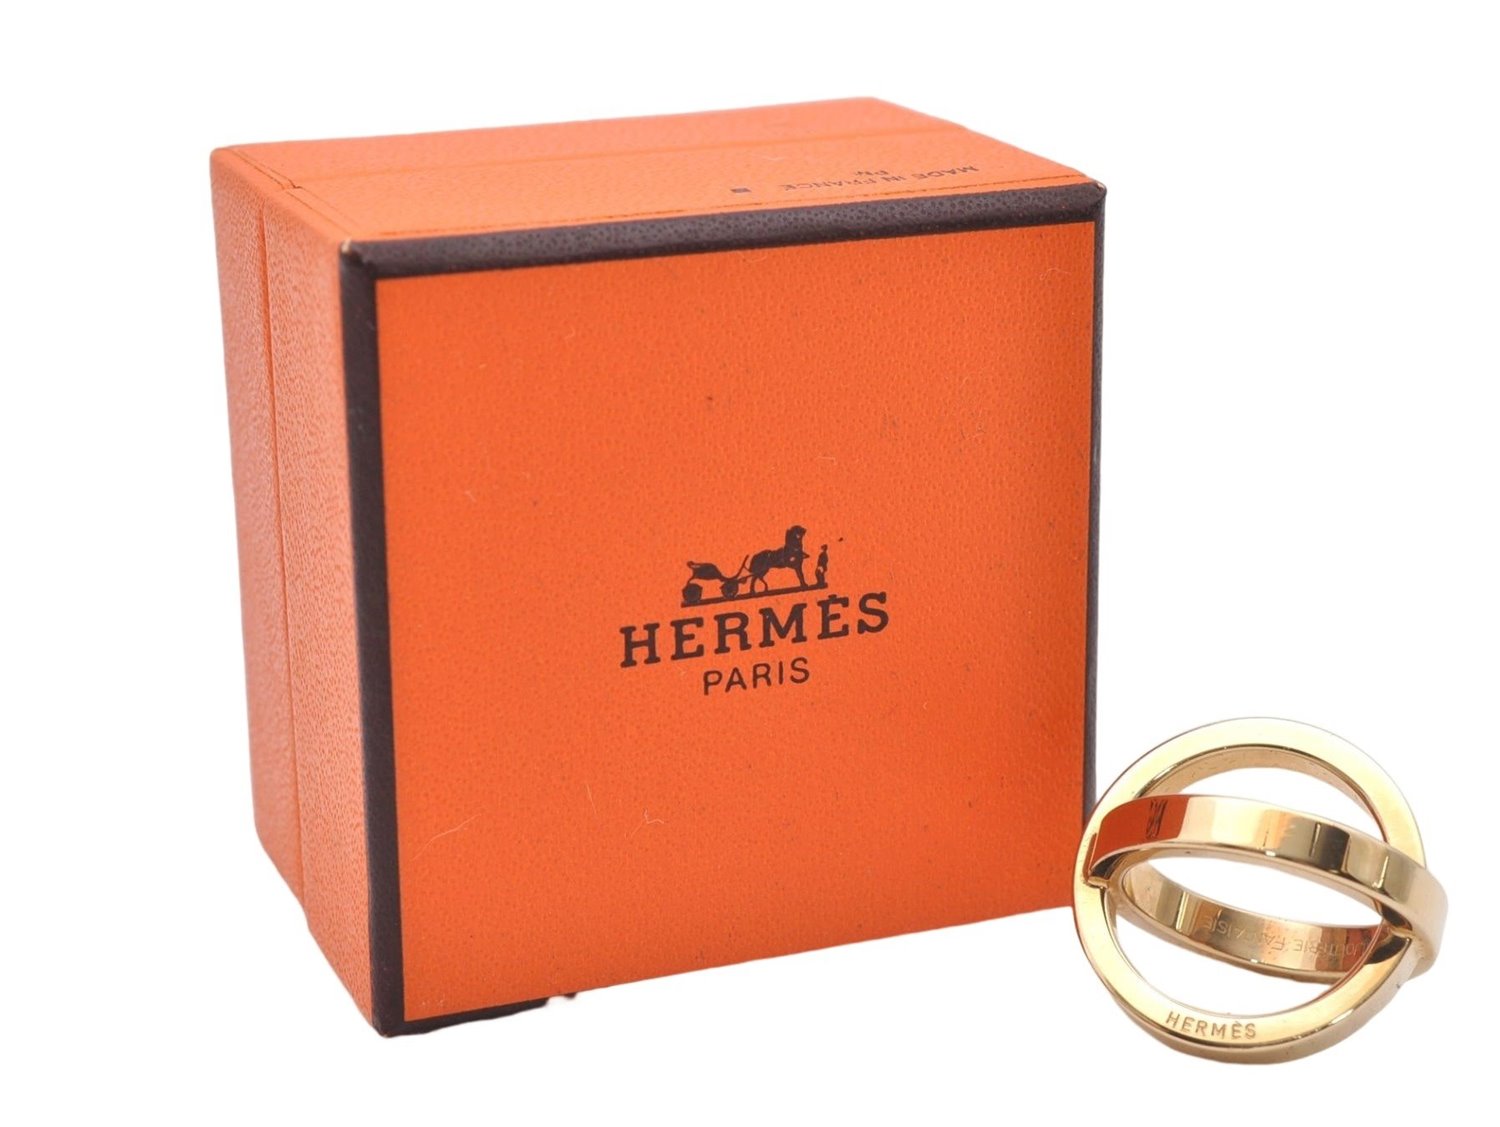 Authentic HERMES Scarf Ring Cosmos Bijouterie Fantaisie Gold Box 5258D